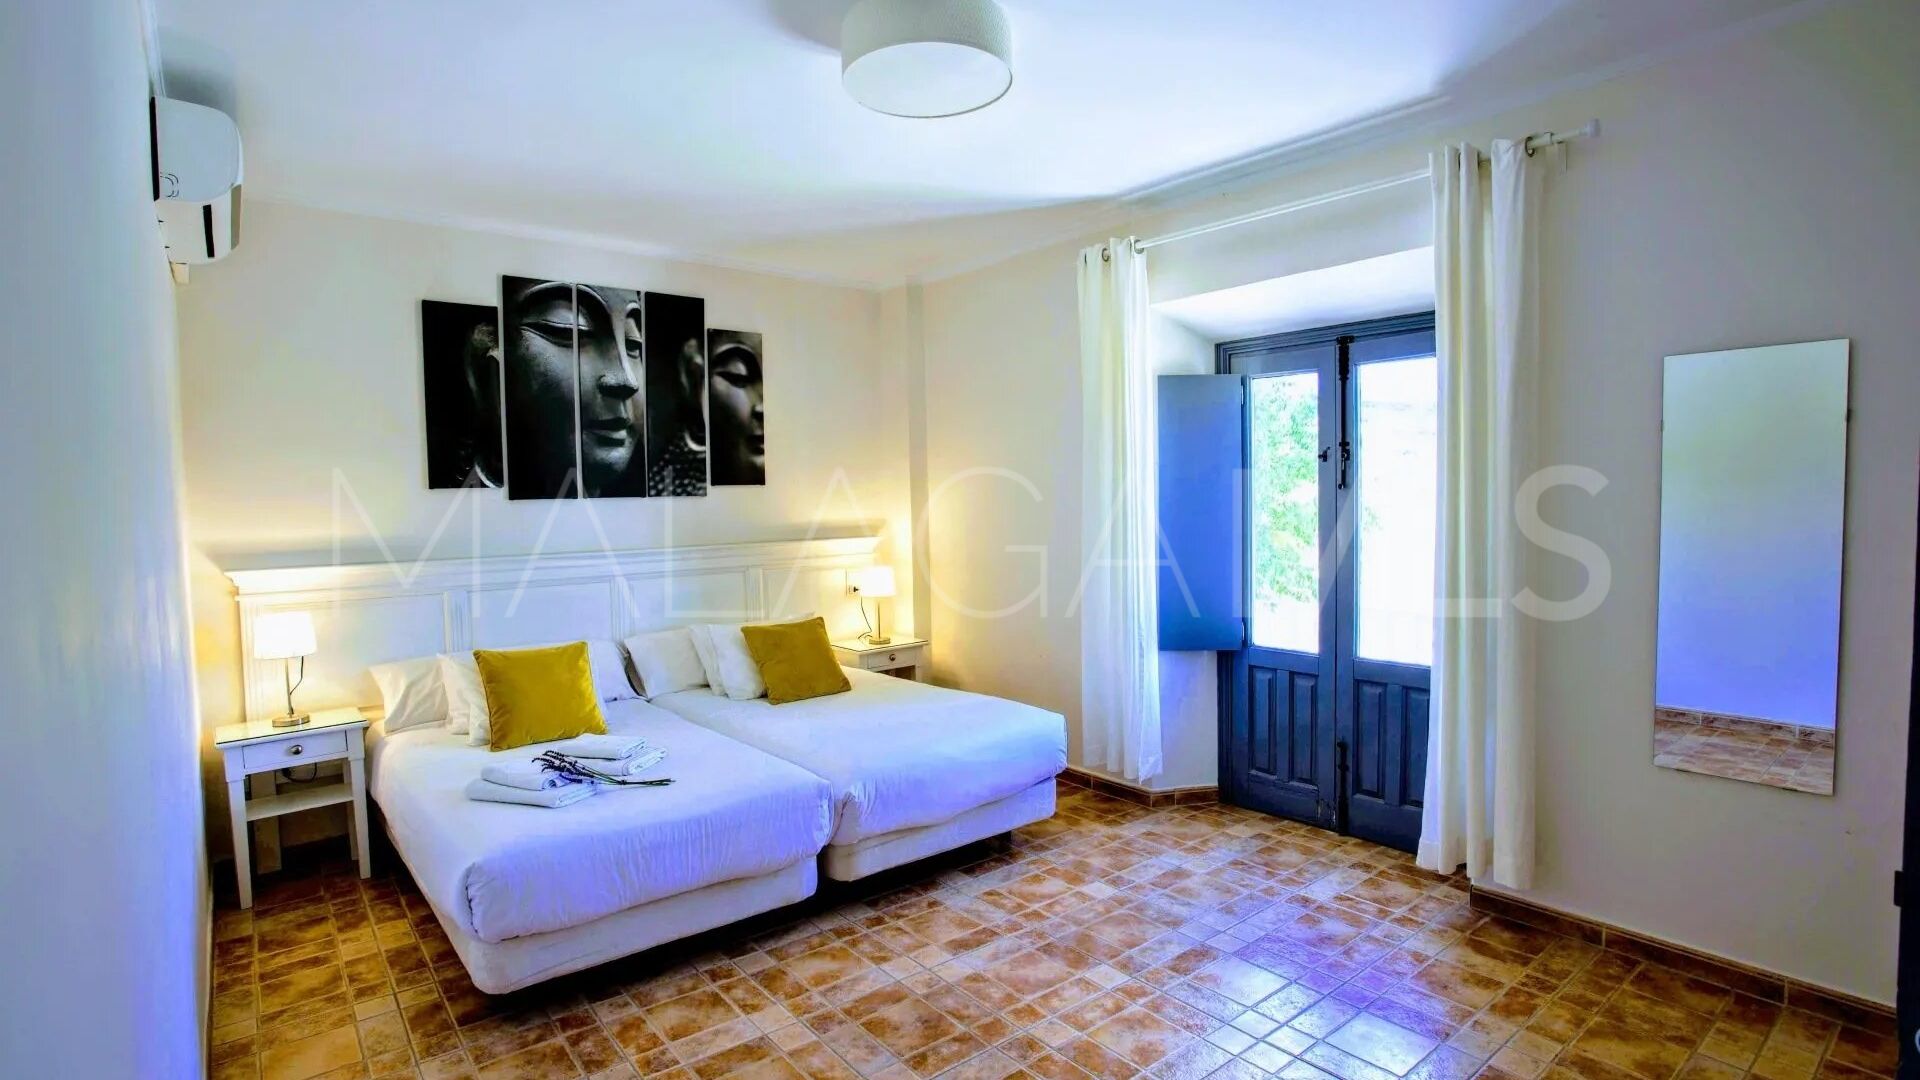 15 bedrooms hotel for sale in Ronda